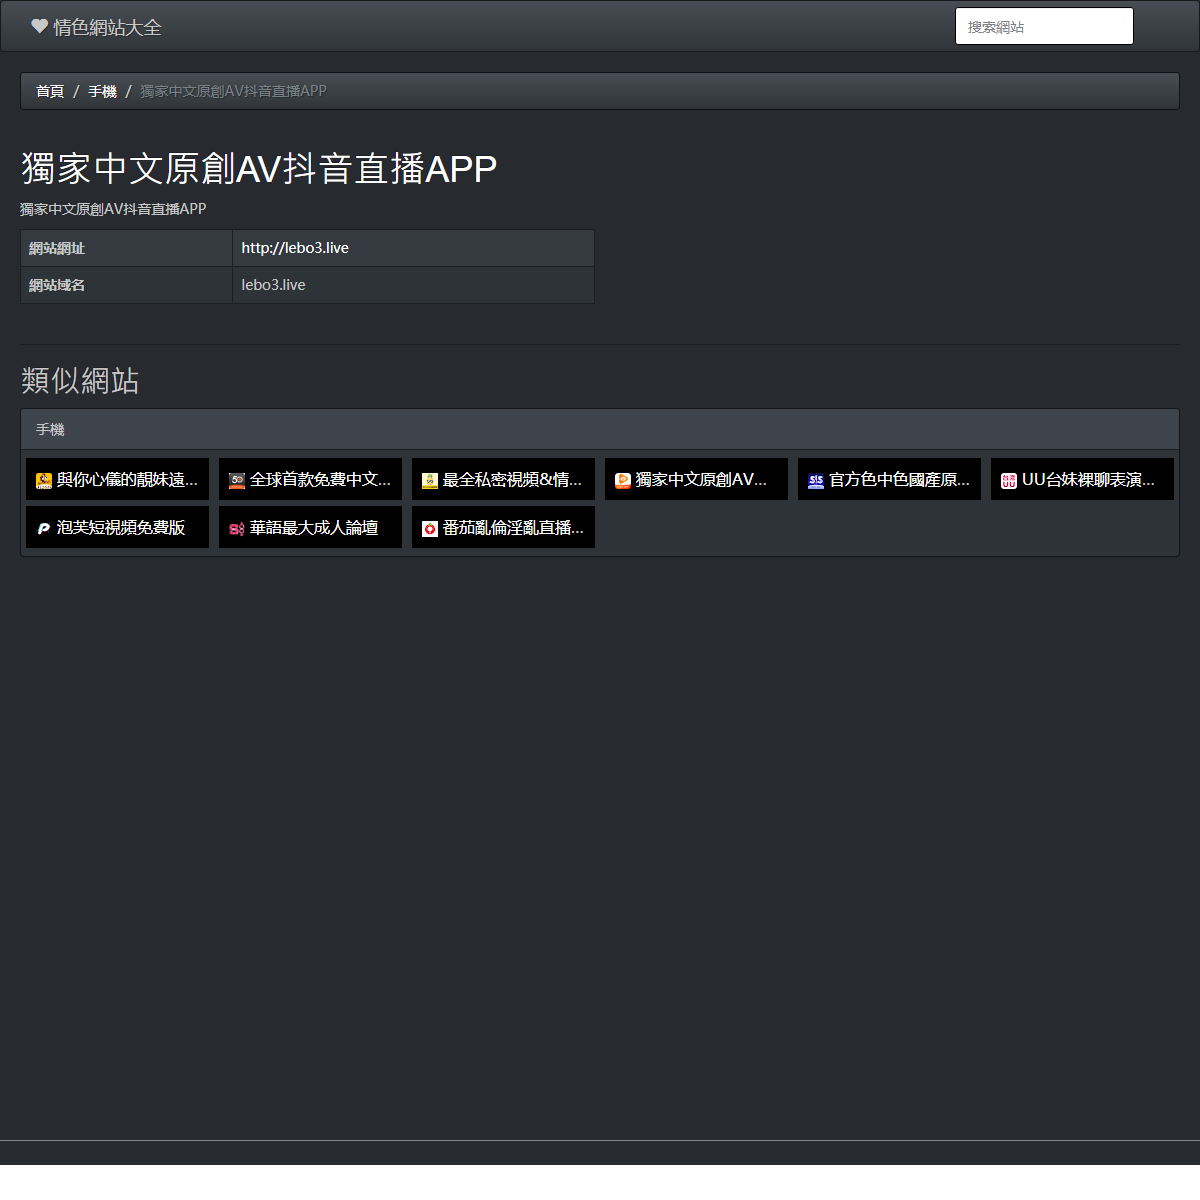 A complete backup of https://www.qingse.one/view/3108.html